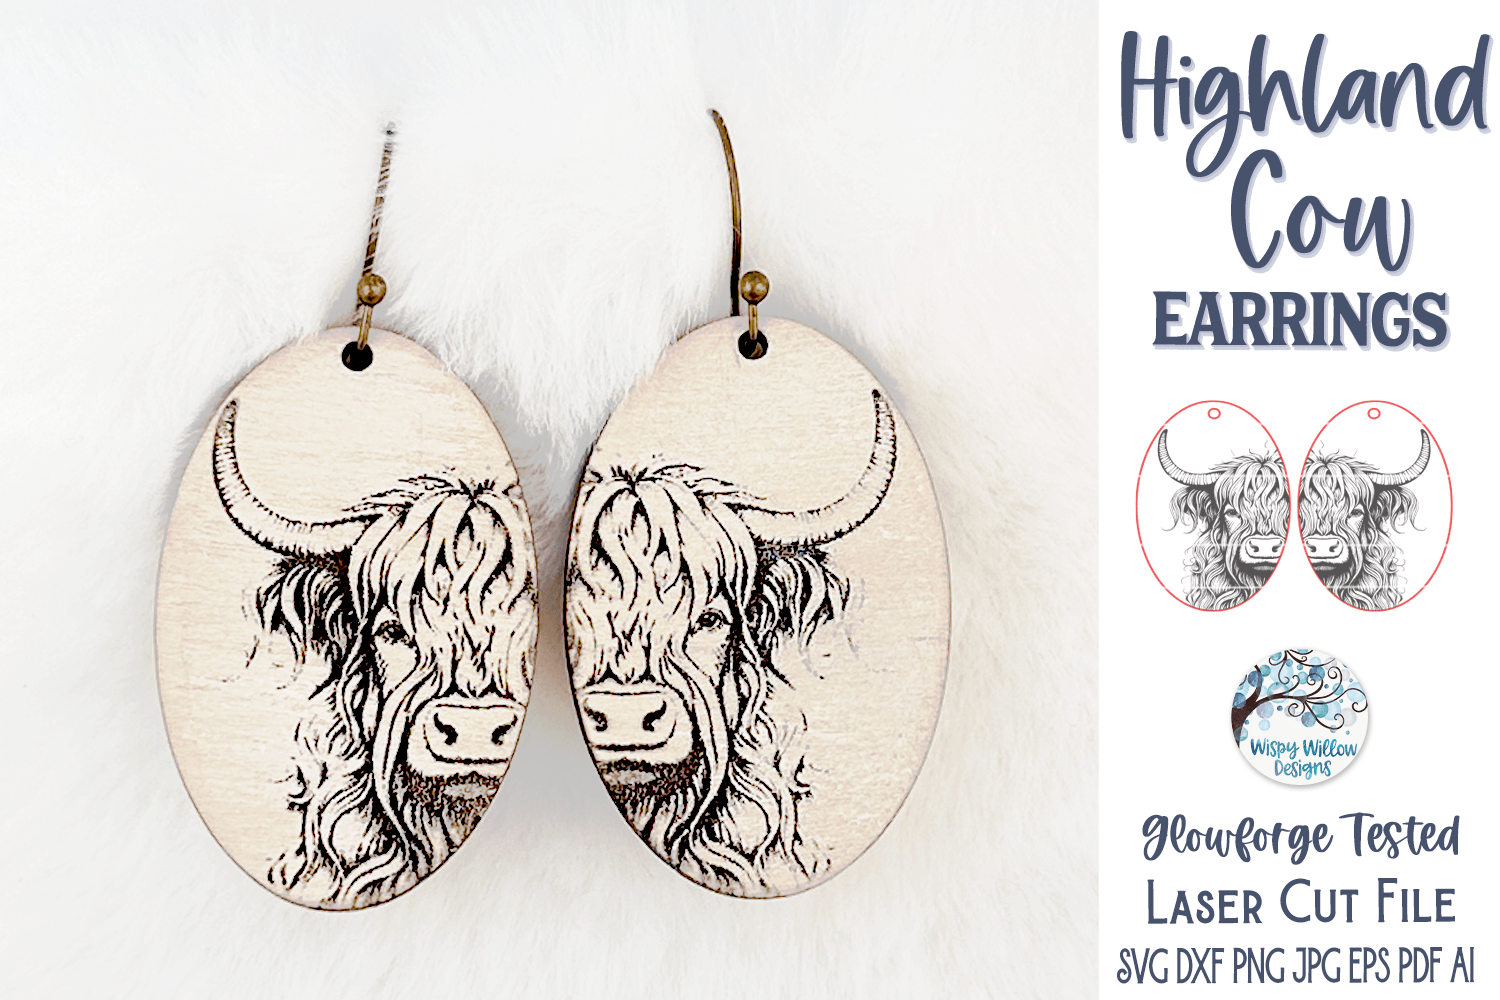 Highland Cow Earrings SVG File for Glowforge or Laser Cutter Wispy Willow Designs Company